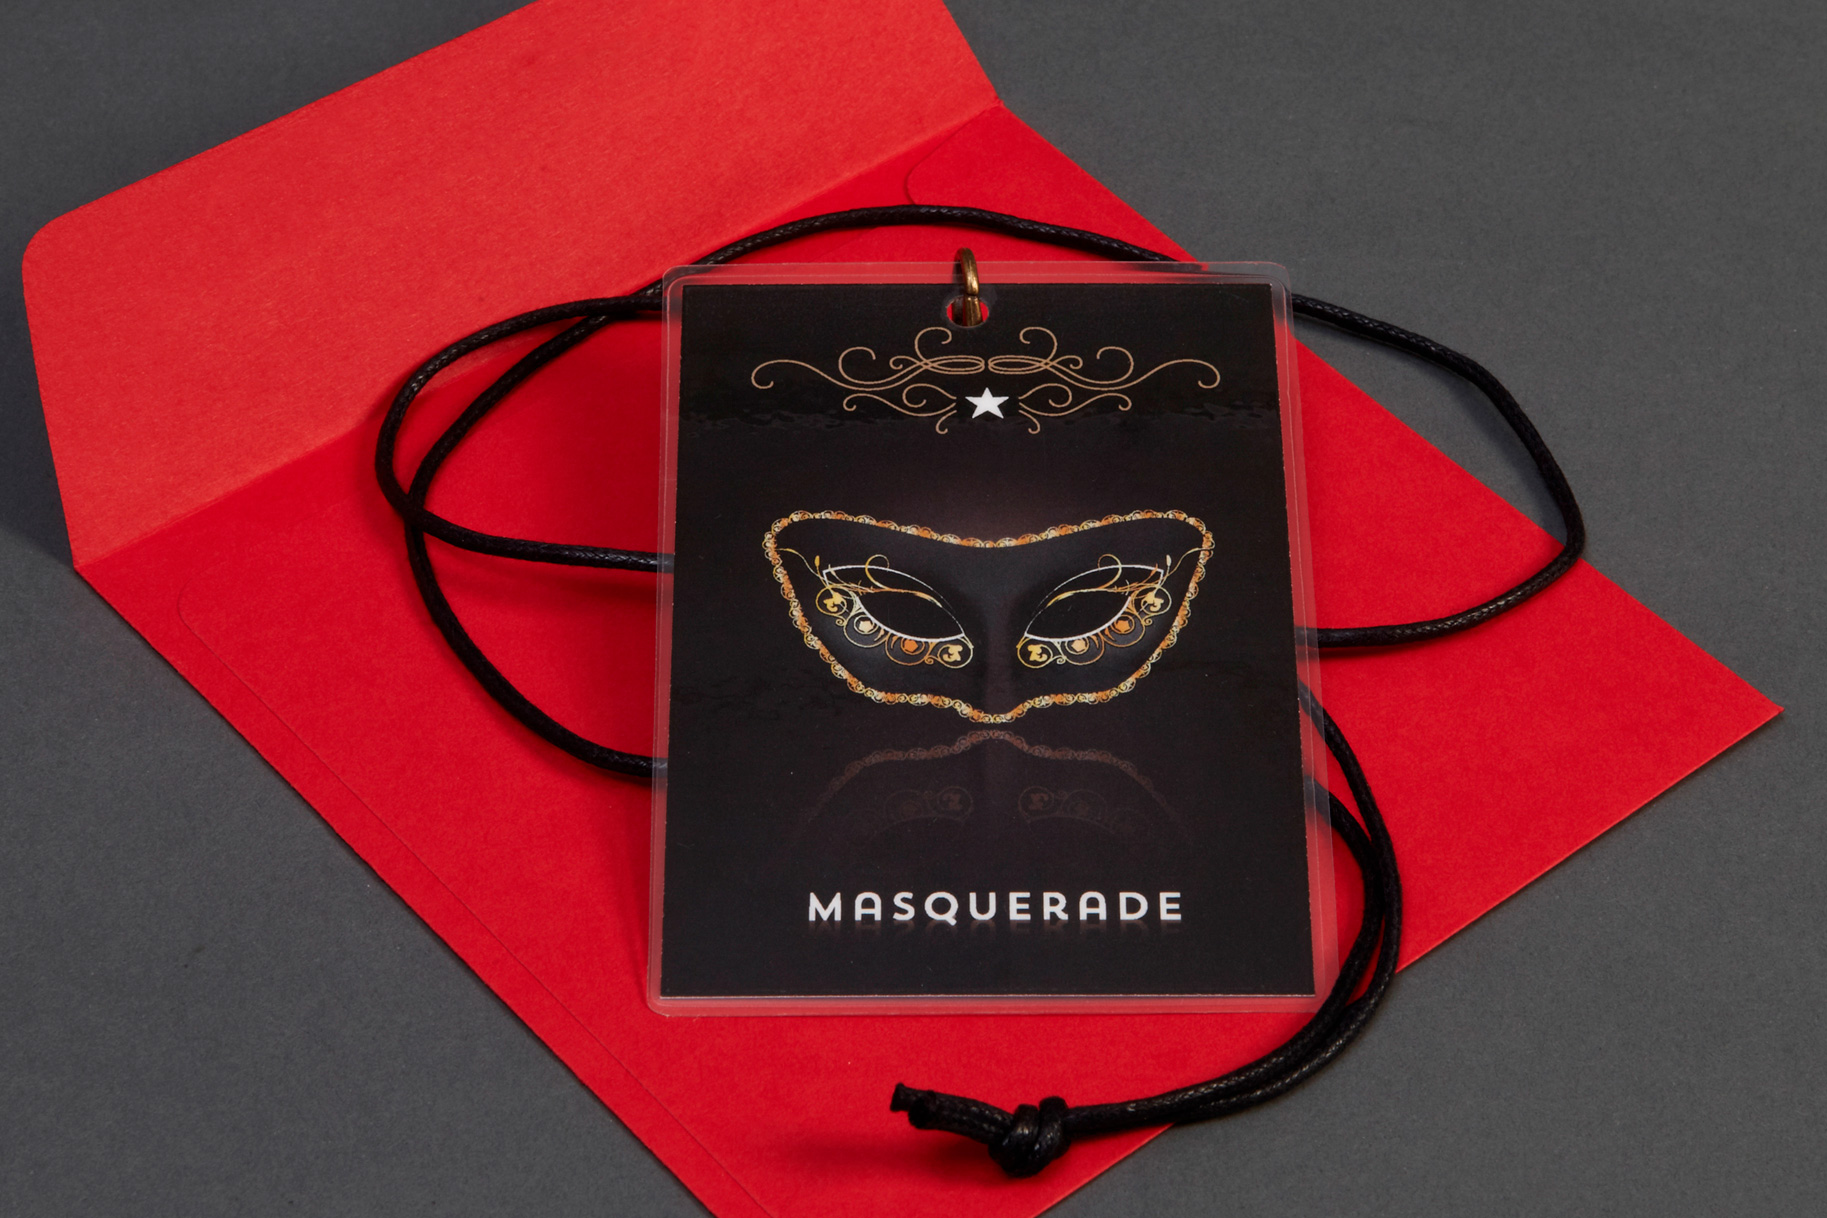 Invitation to a Masquerade party on a leather lanyard, sitting on a red envelope